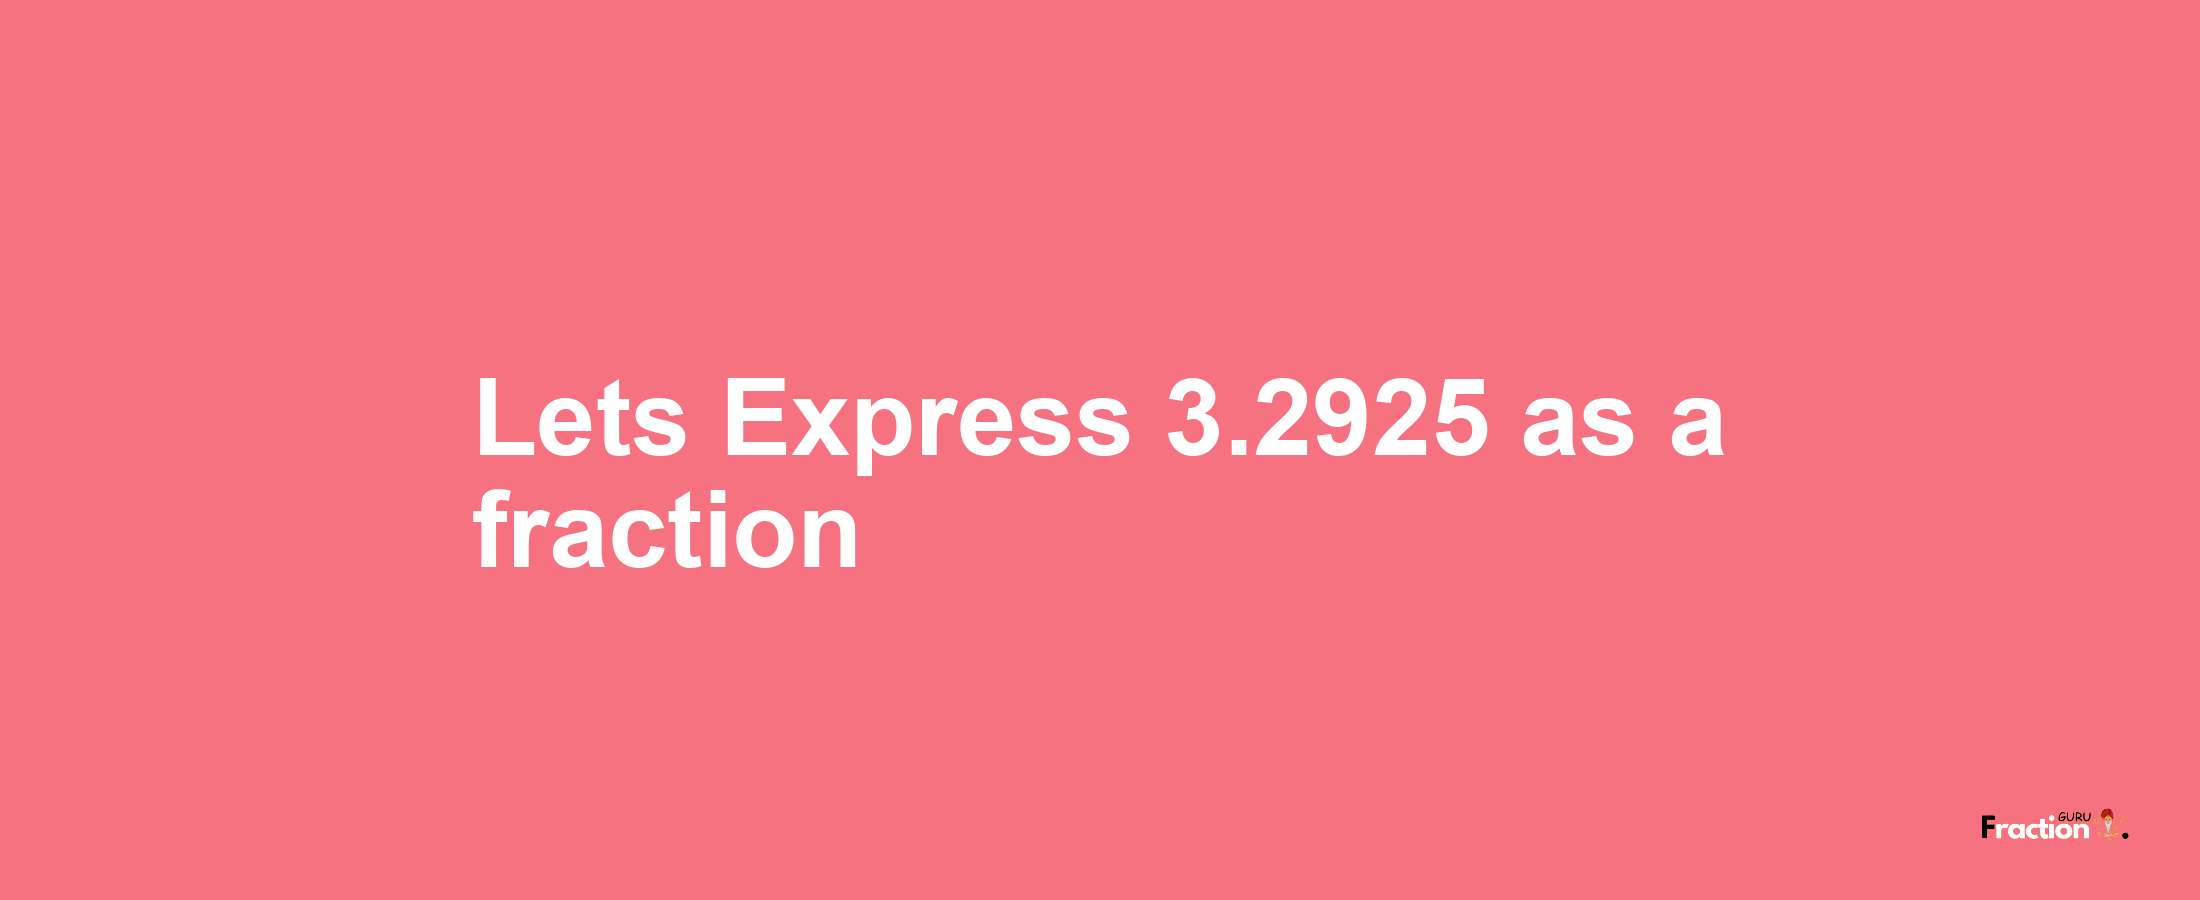 Lets Express 3.2925 as afraction